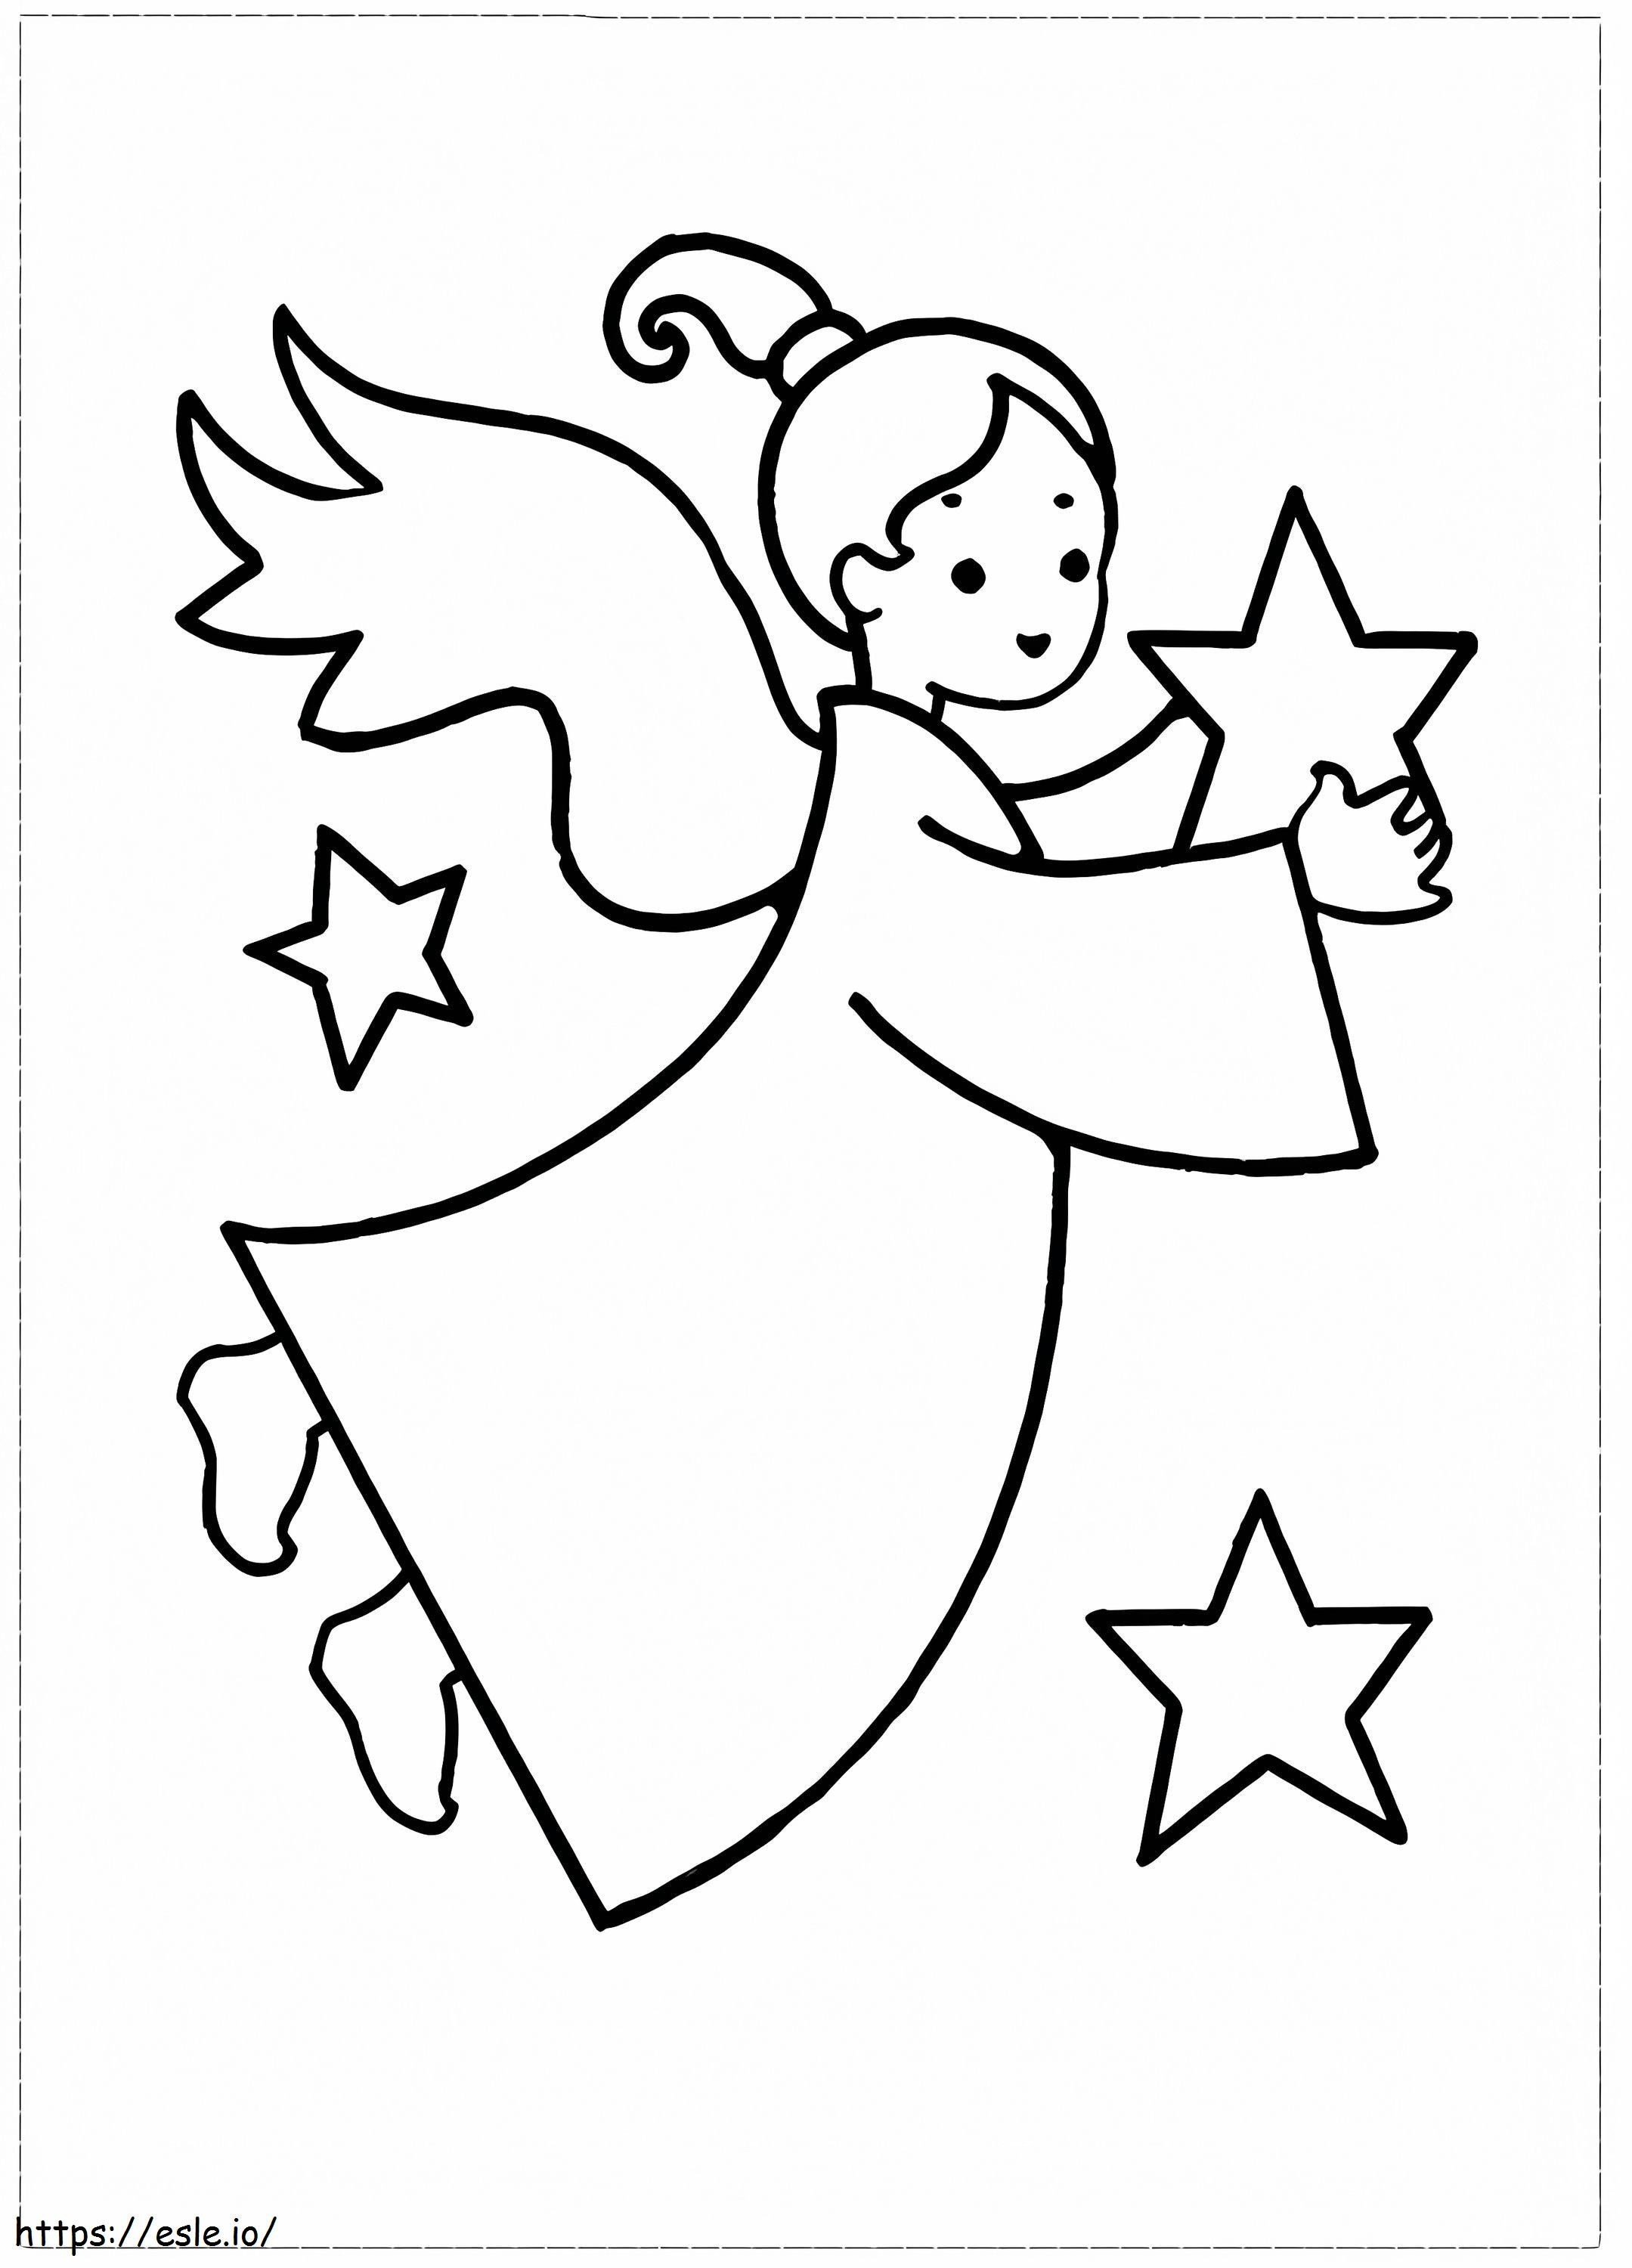 Angel With Stars coloring page